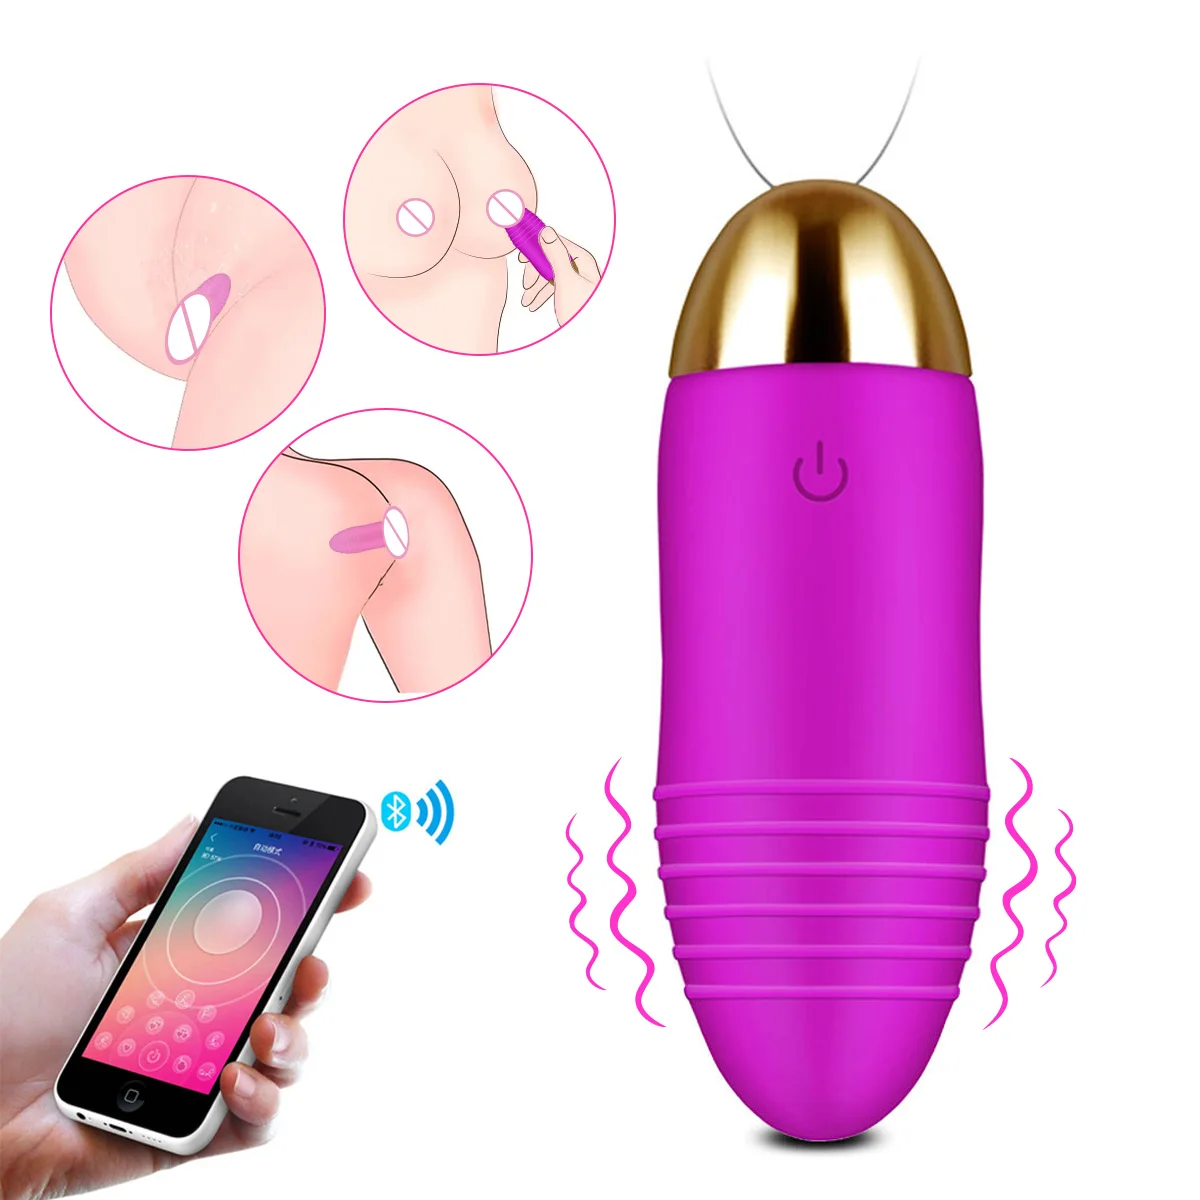 Source Intelligent 10 Mode Sex Toys Vibrating Silicone Phone APP Wifi Wireless Remote Control Blue Tooth Egg Vibrator for Woman Vagina on m.alibaba pic